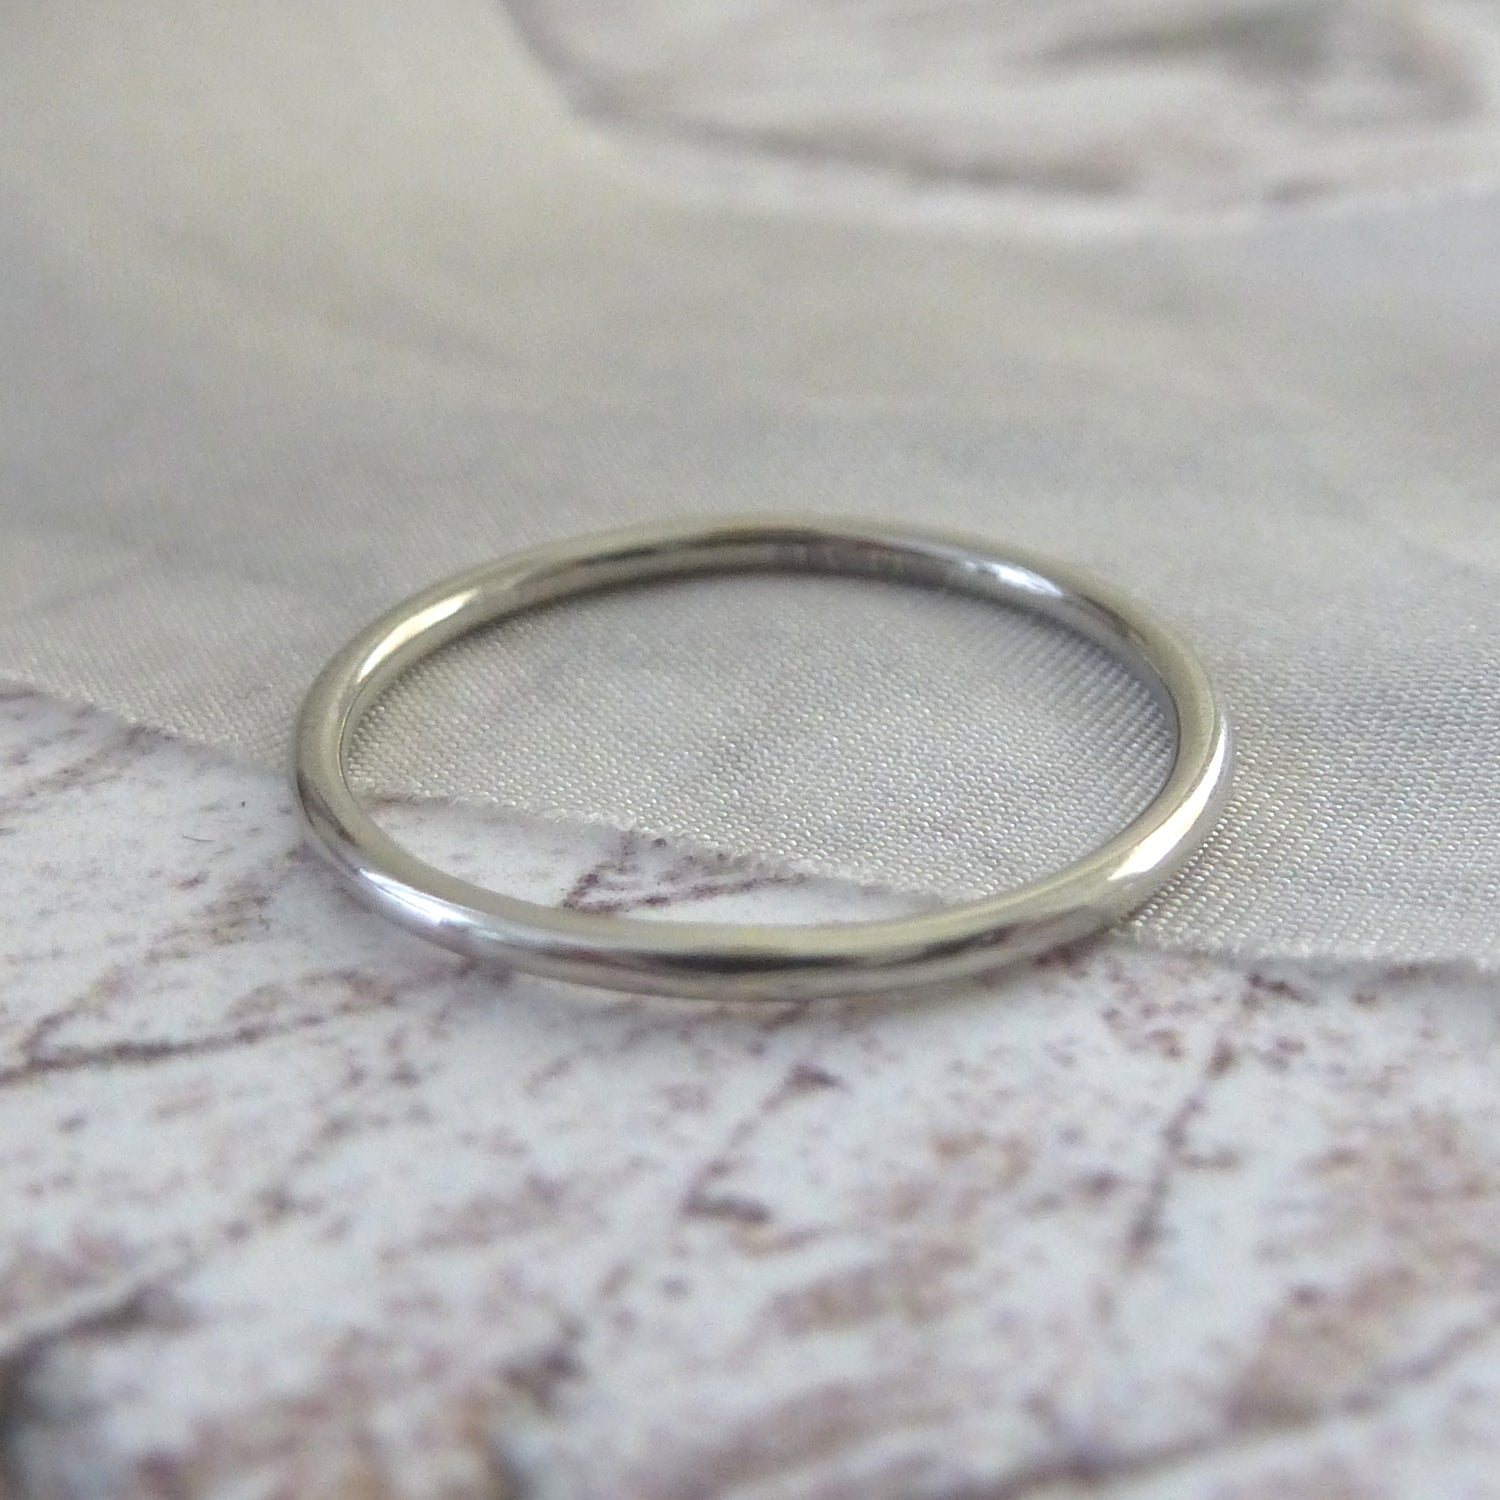 1.2mm round band in 18ct white gold, smooth finish, close up on piece of ribbon